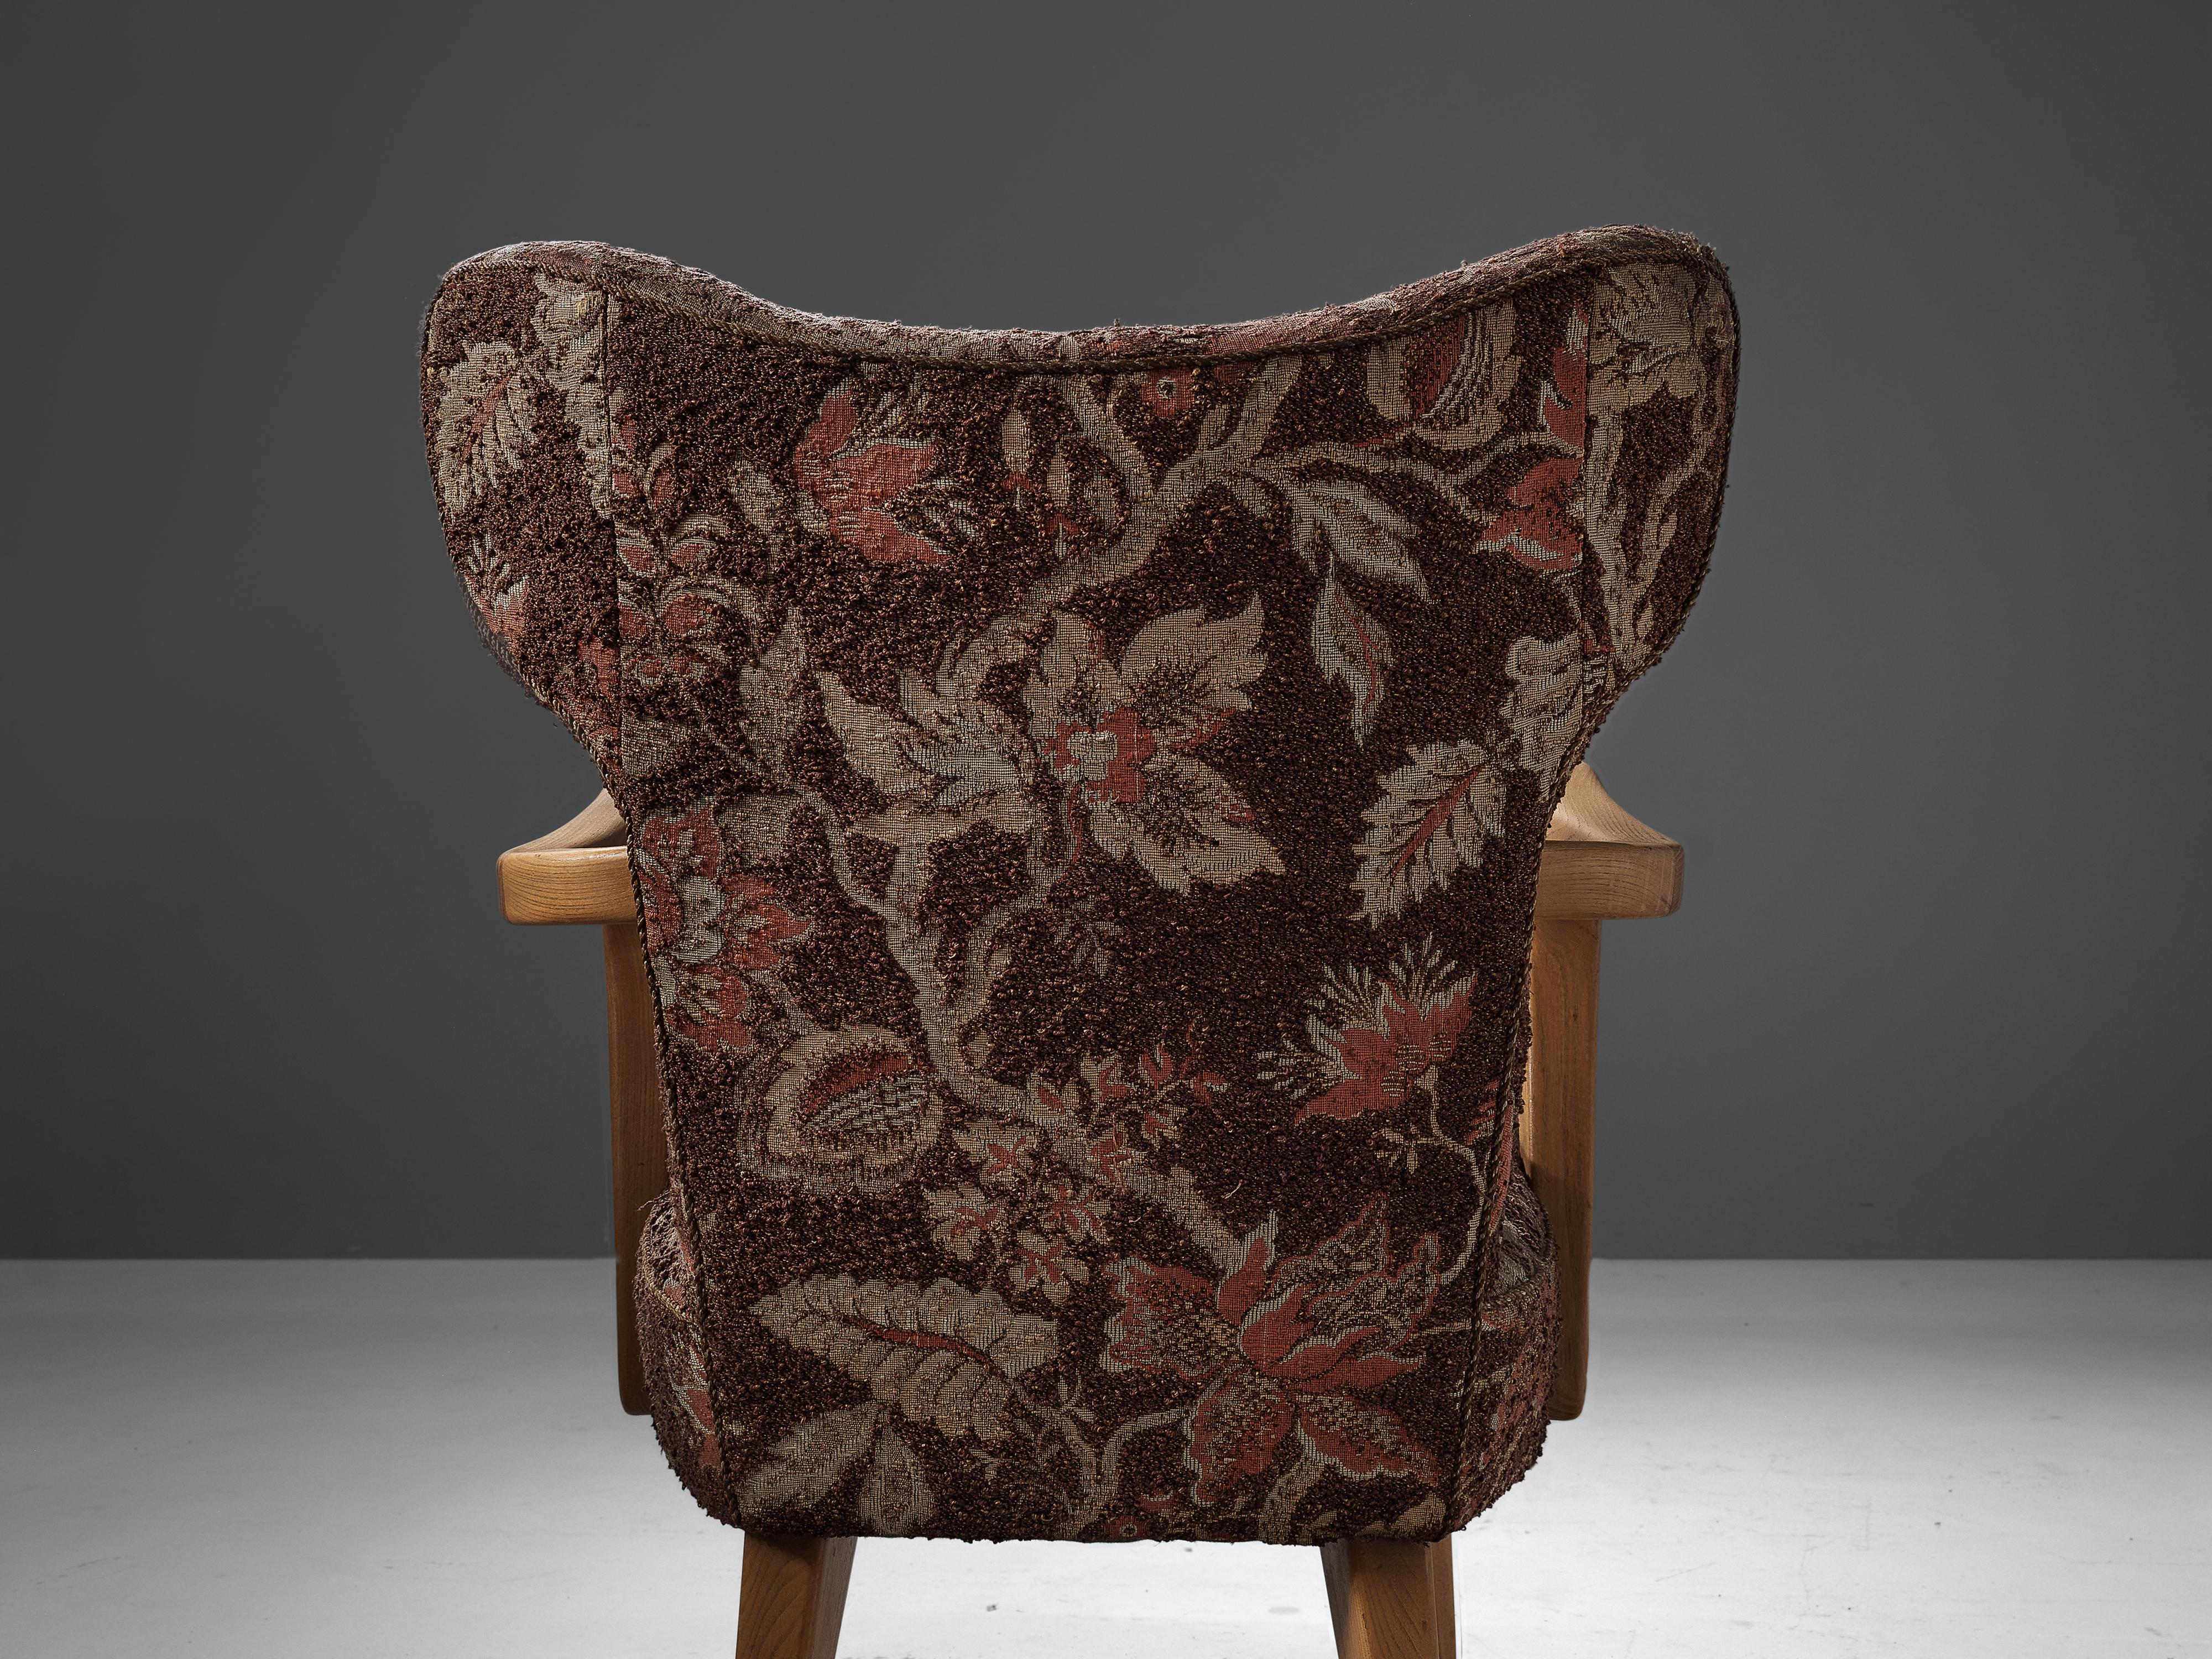 Fabric Sculptural Italian Lounge Chair in Oak and Floral Upholstery